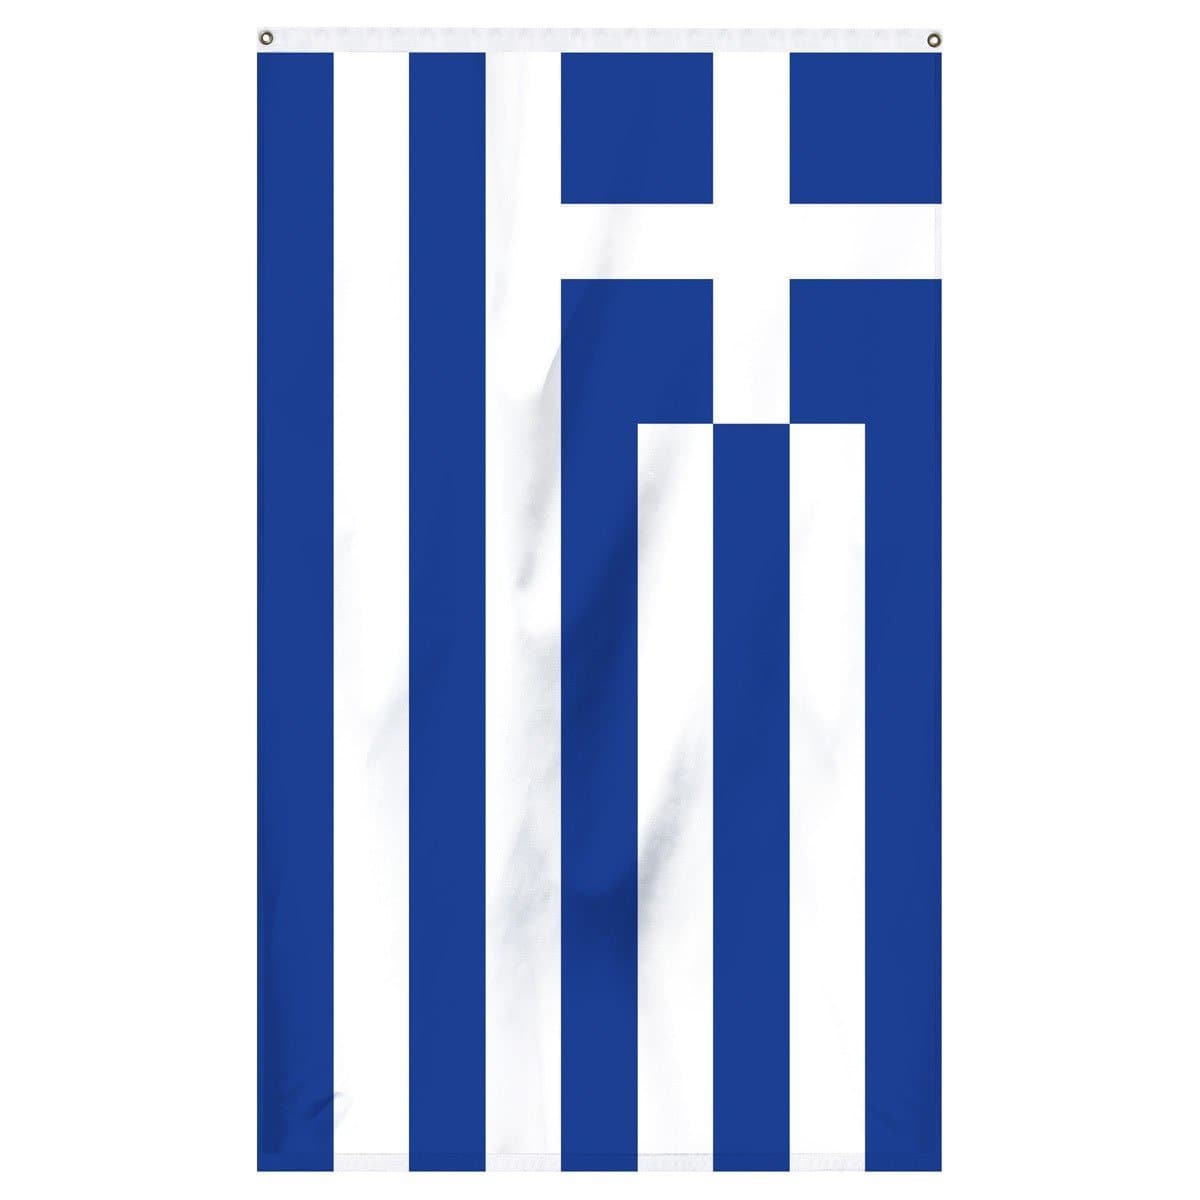 national flag of Greece for sale to buy online